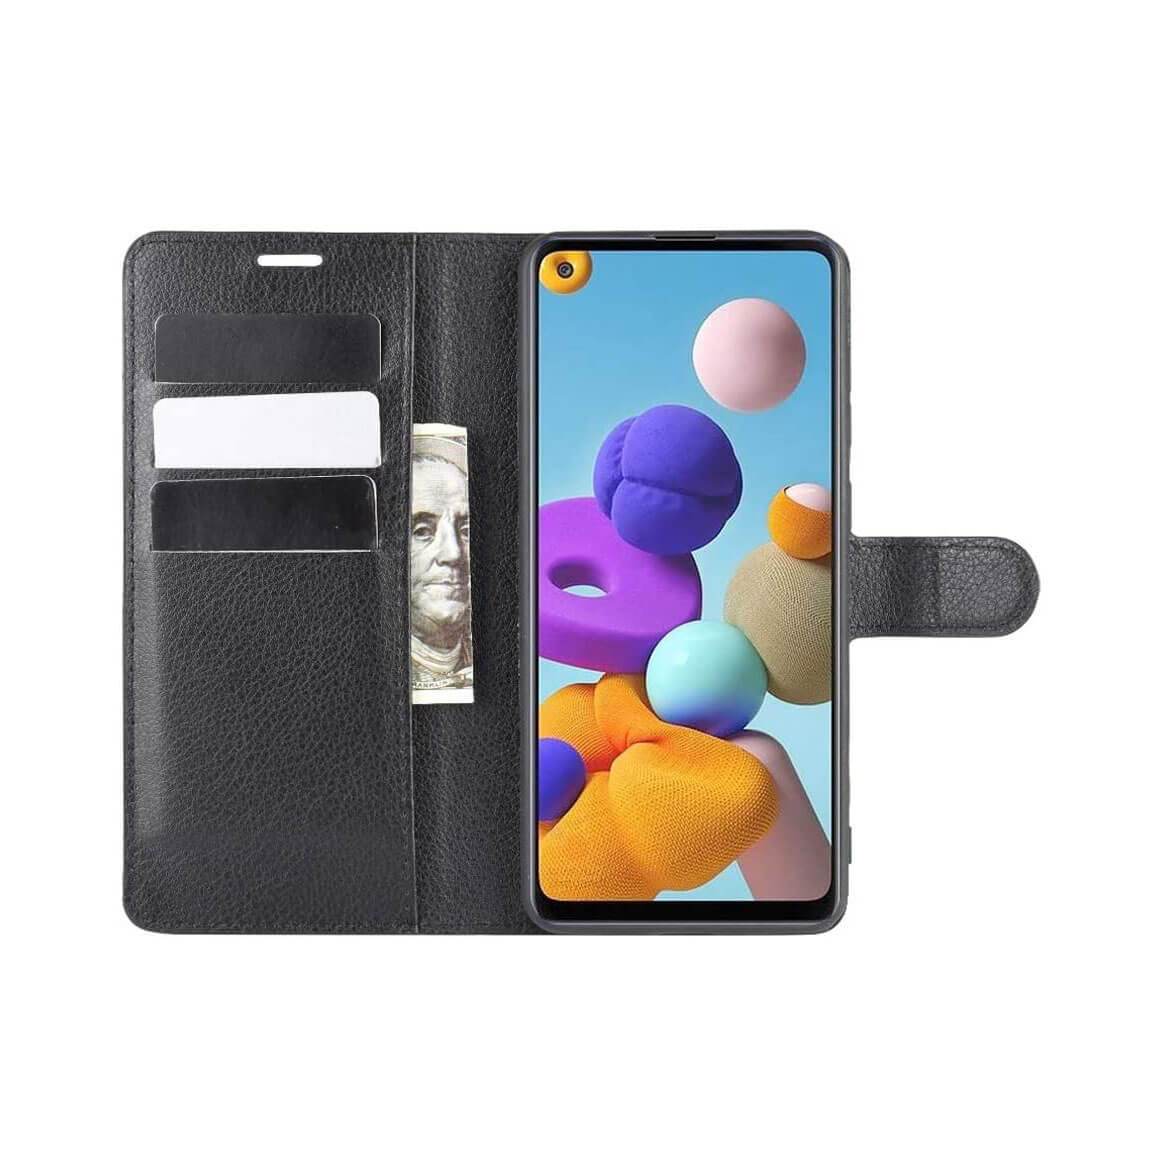 PU Leather Wallet Cover For Samsung Galaxy A21s Case Holder Card Slots Black